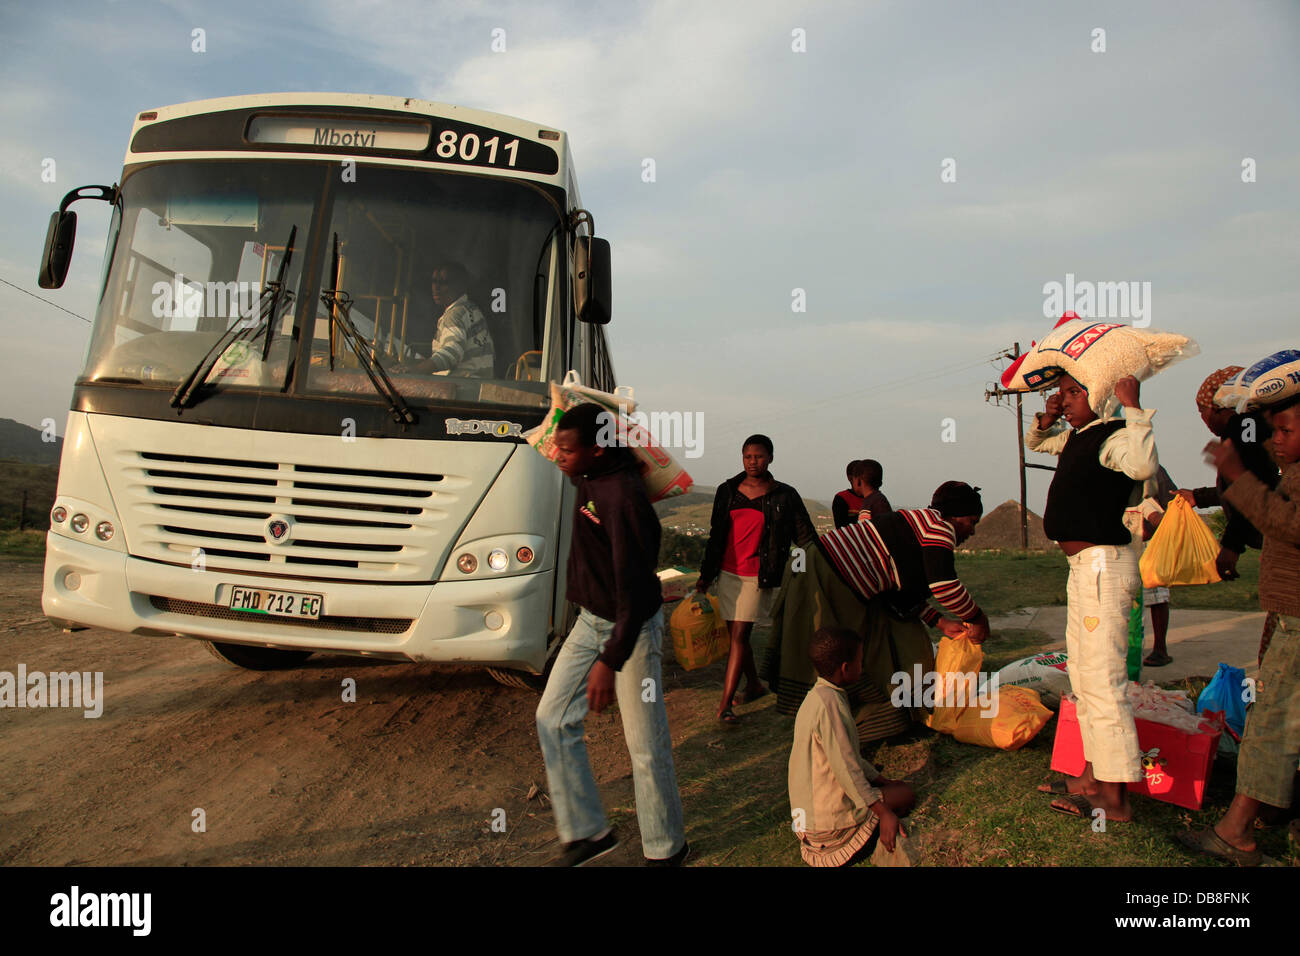 local people carrying sacks of food board a local bus at Mbotyi on the Wild  Coast, Transkei Stock Photo - Alamy